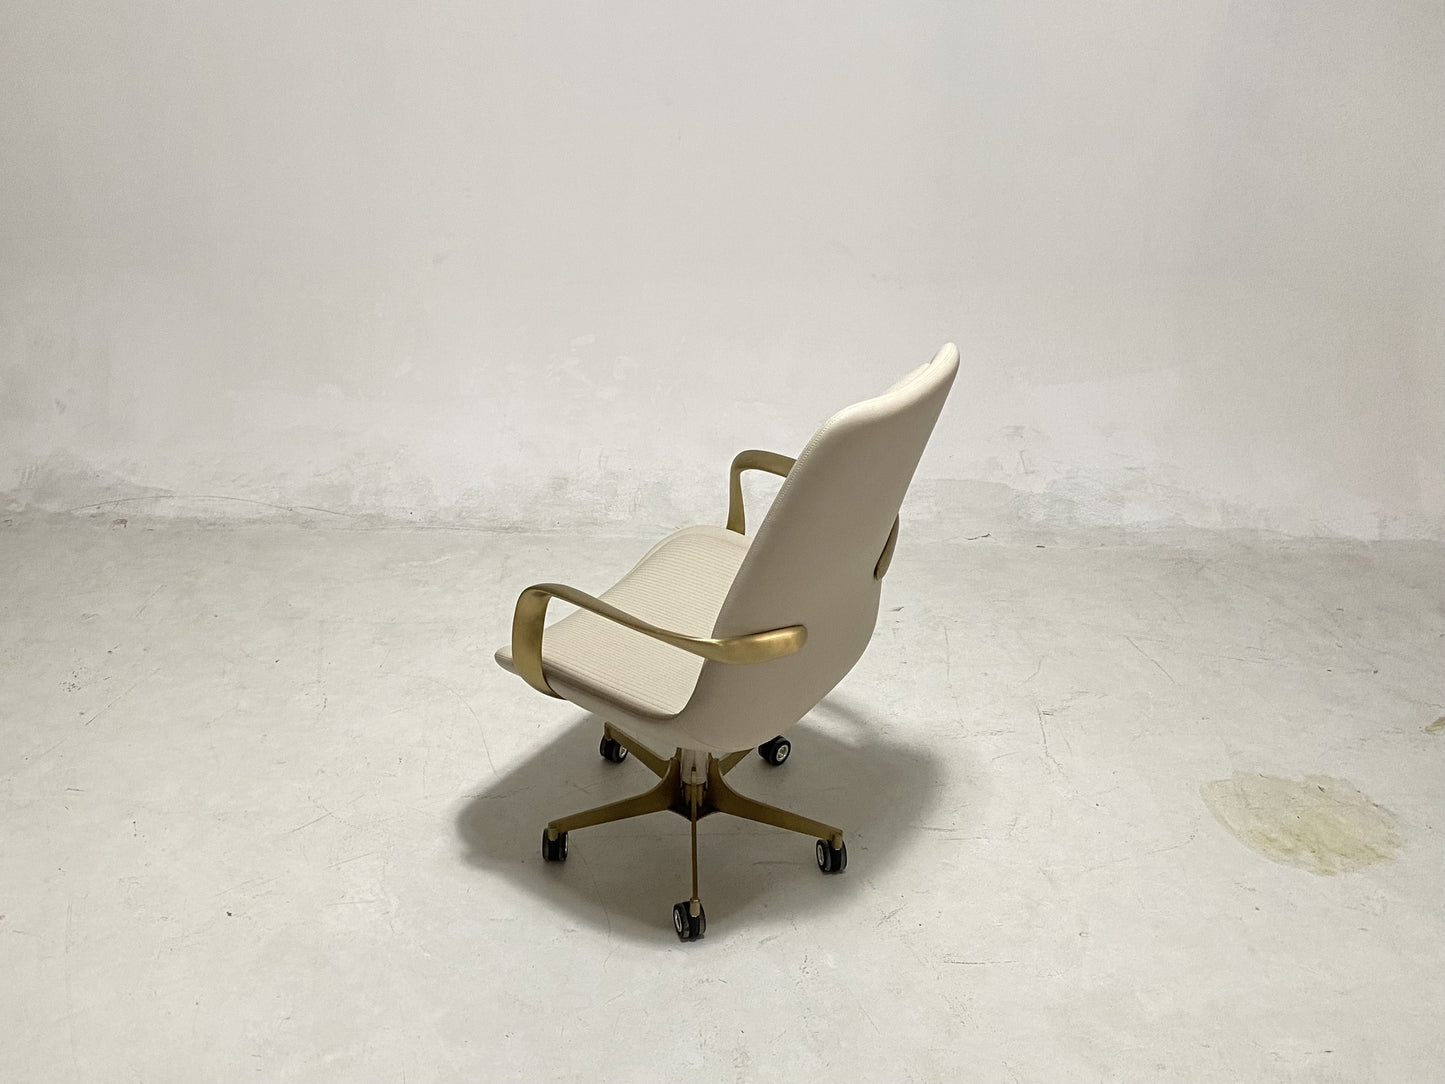 Visionnaire Volver Office Chair